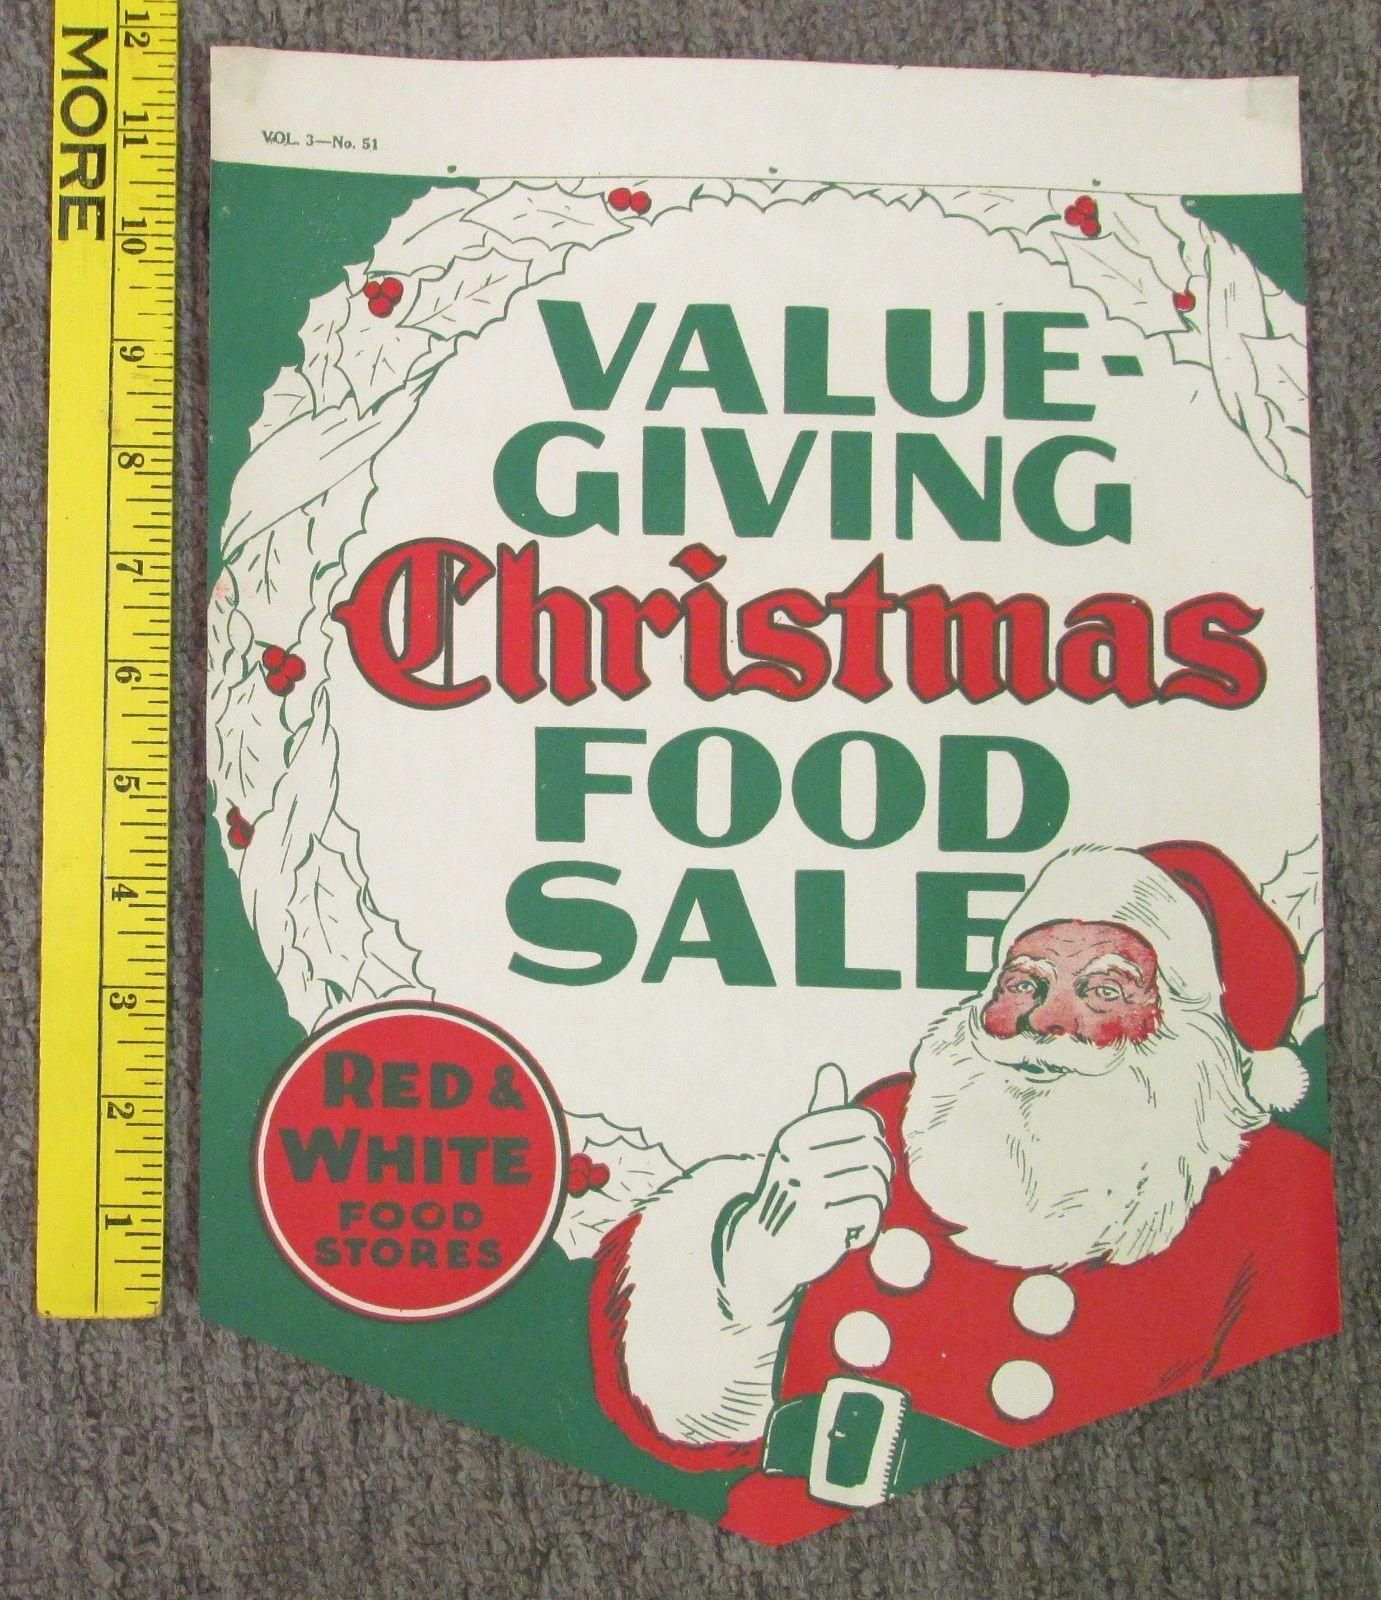 Red White Food Stores Logo - 1950's Red & White Grocery Store Christmas Ad w/ Santa